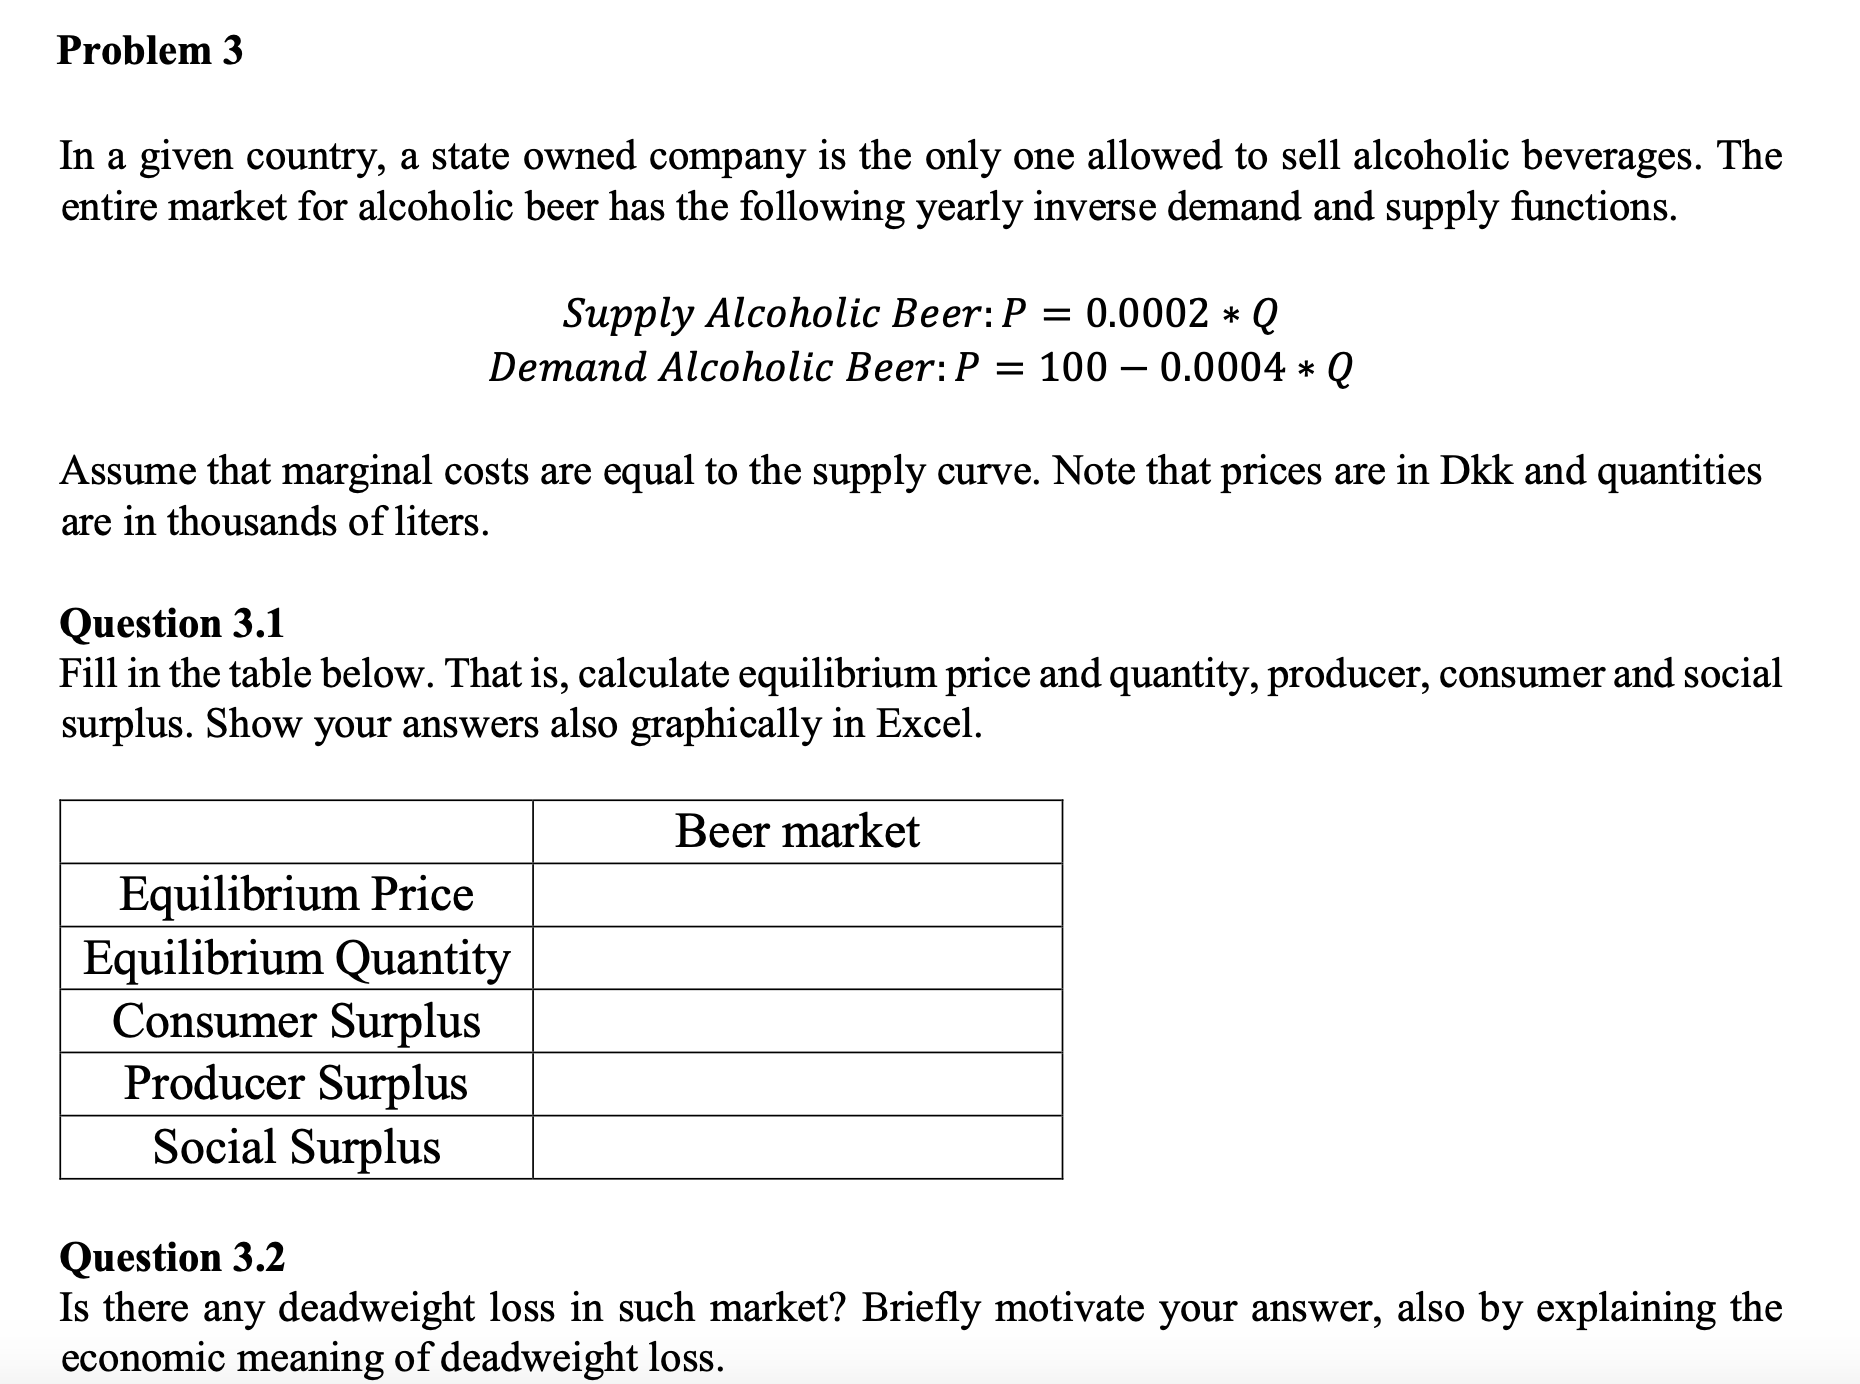 Fill in the table below. That is, calculate equilibrium price and quantity, producer, consumer and social
surplus. Show your answers also graphically in Excel.
Beer market
Equilibrium Price
Equilibrium Quantity
Consumer Surplus
Producer Surplus
Social Surplus
Question 3.2
Is there any deadweight loss in such market? Briefly motivate your answer, also by explaining the
economic meaning of deadweight loss.
